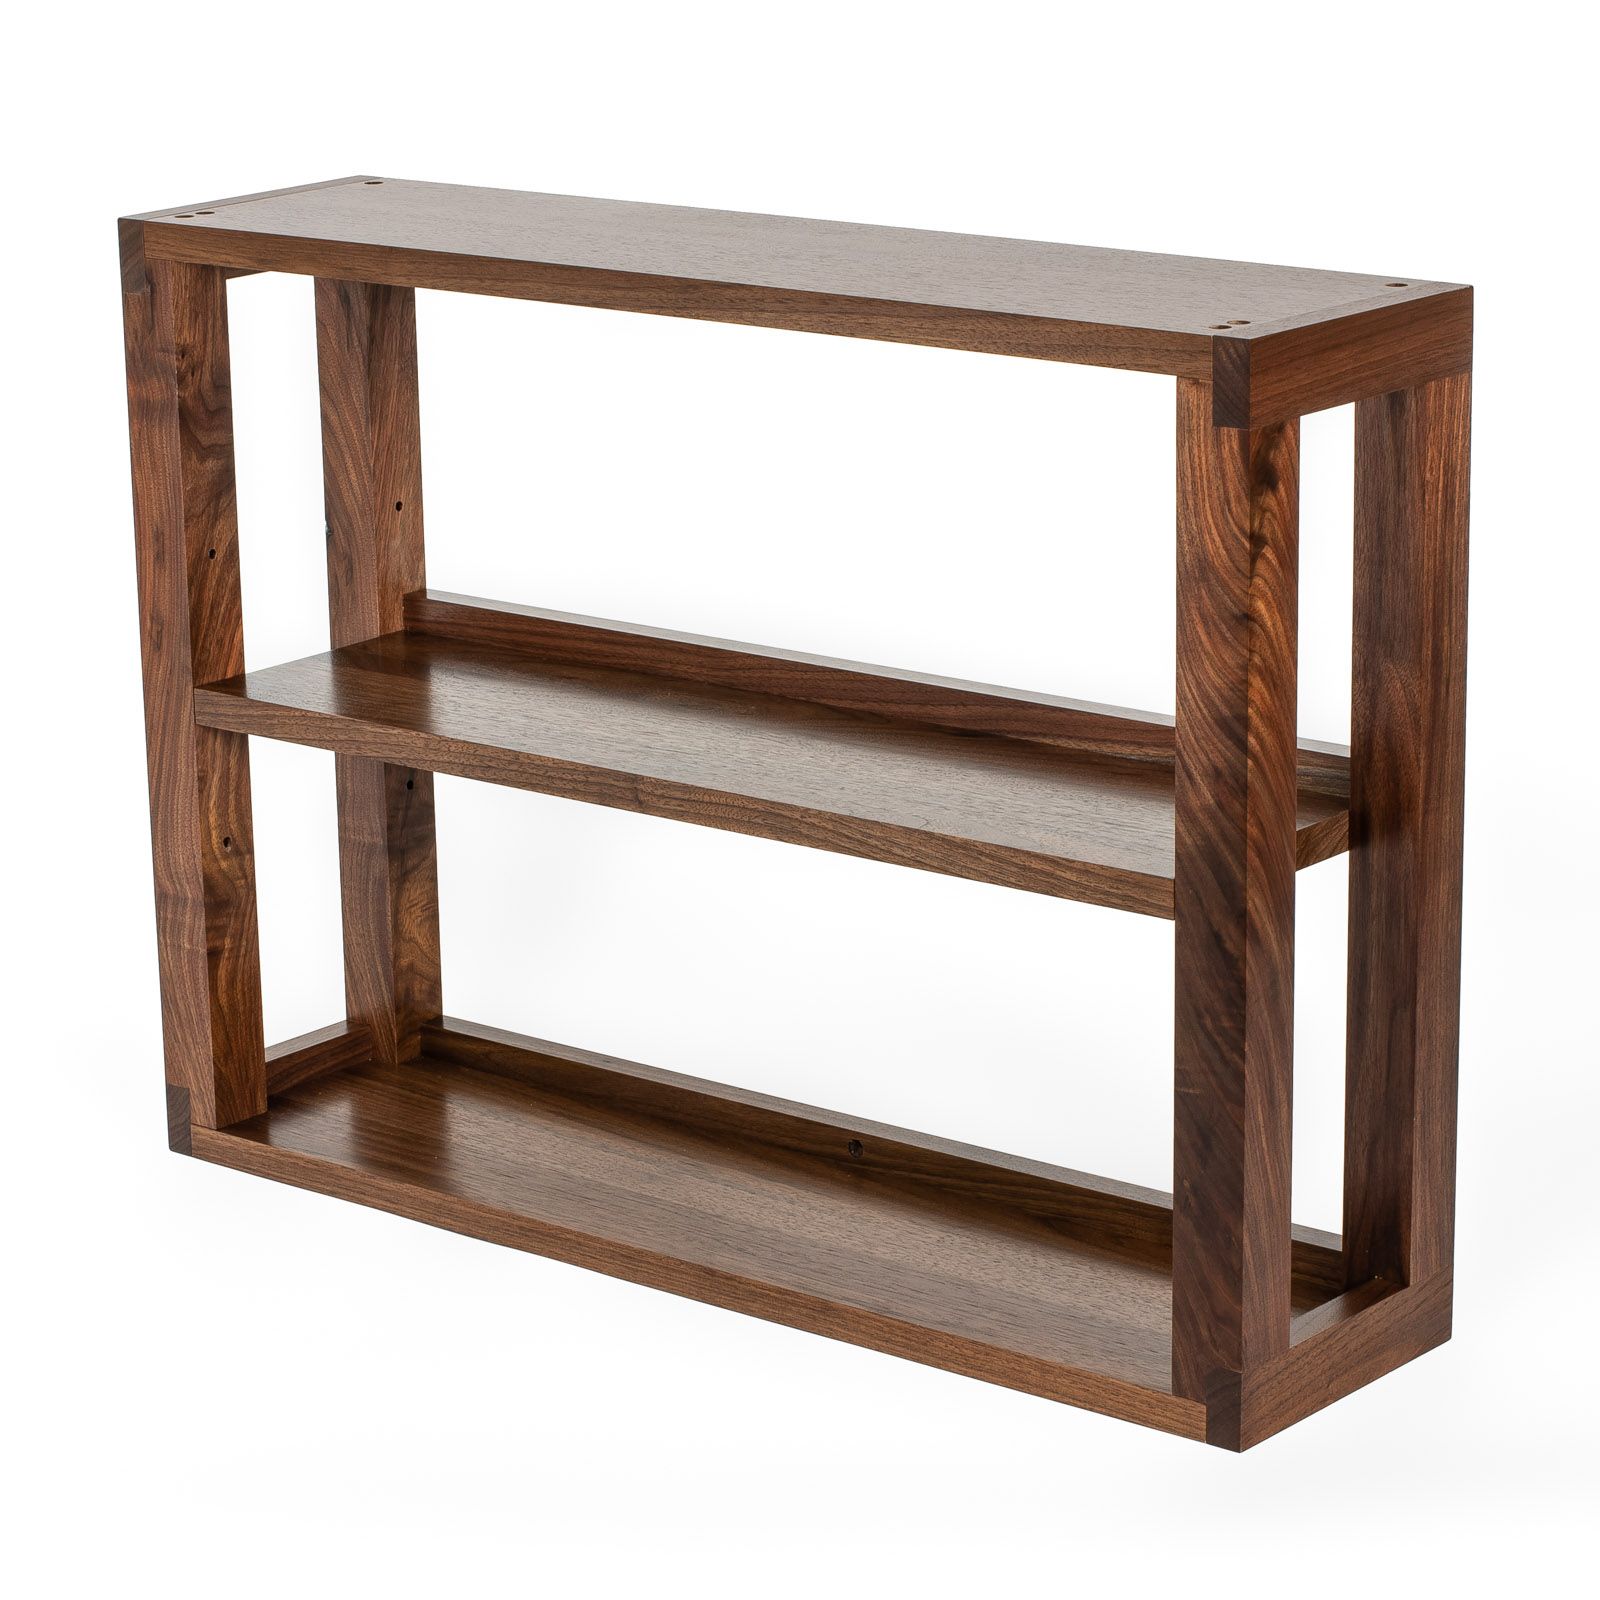 Walnut 2 Tier Media Shelves Within Walnut 2 Tier Bookcases (View 11 of 15)